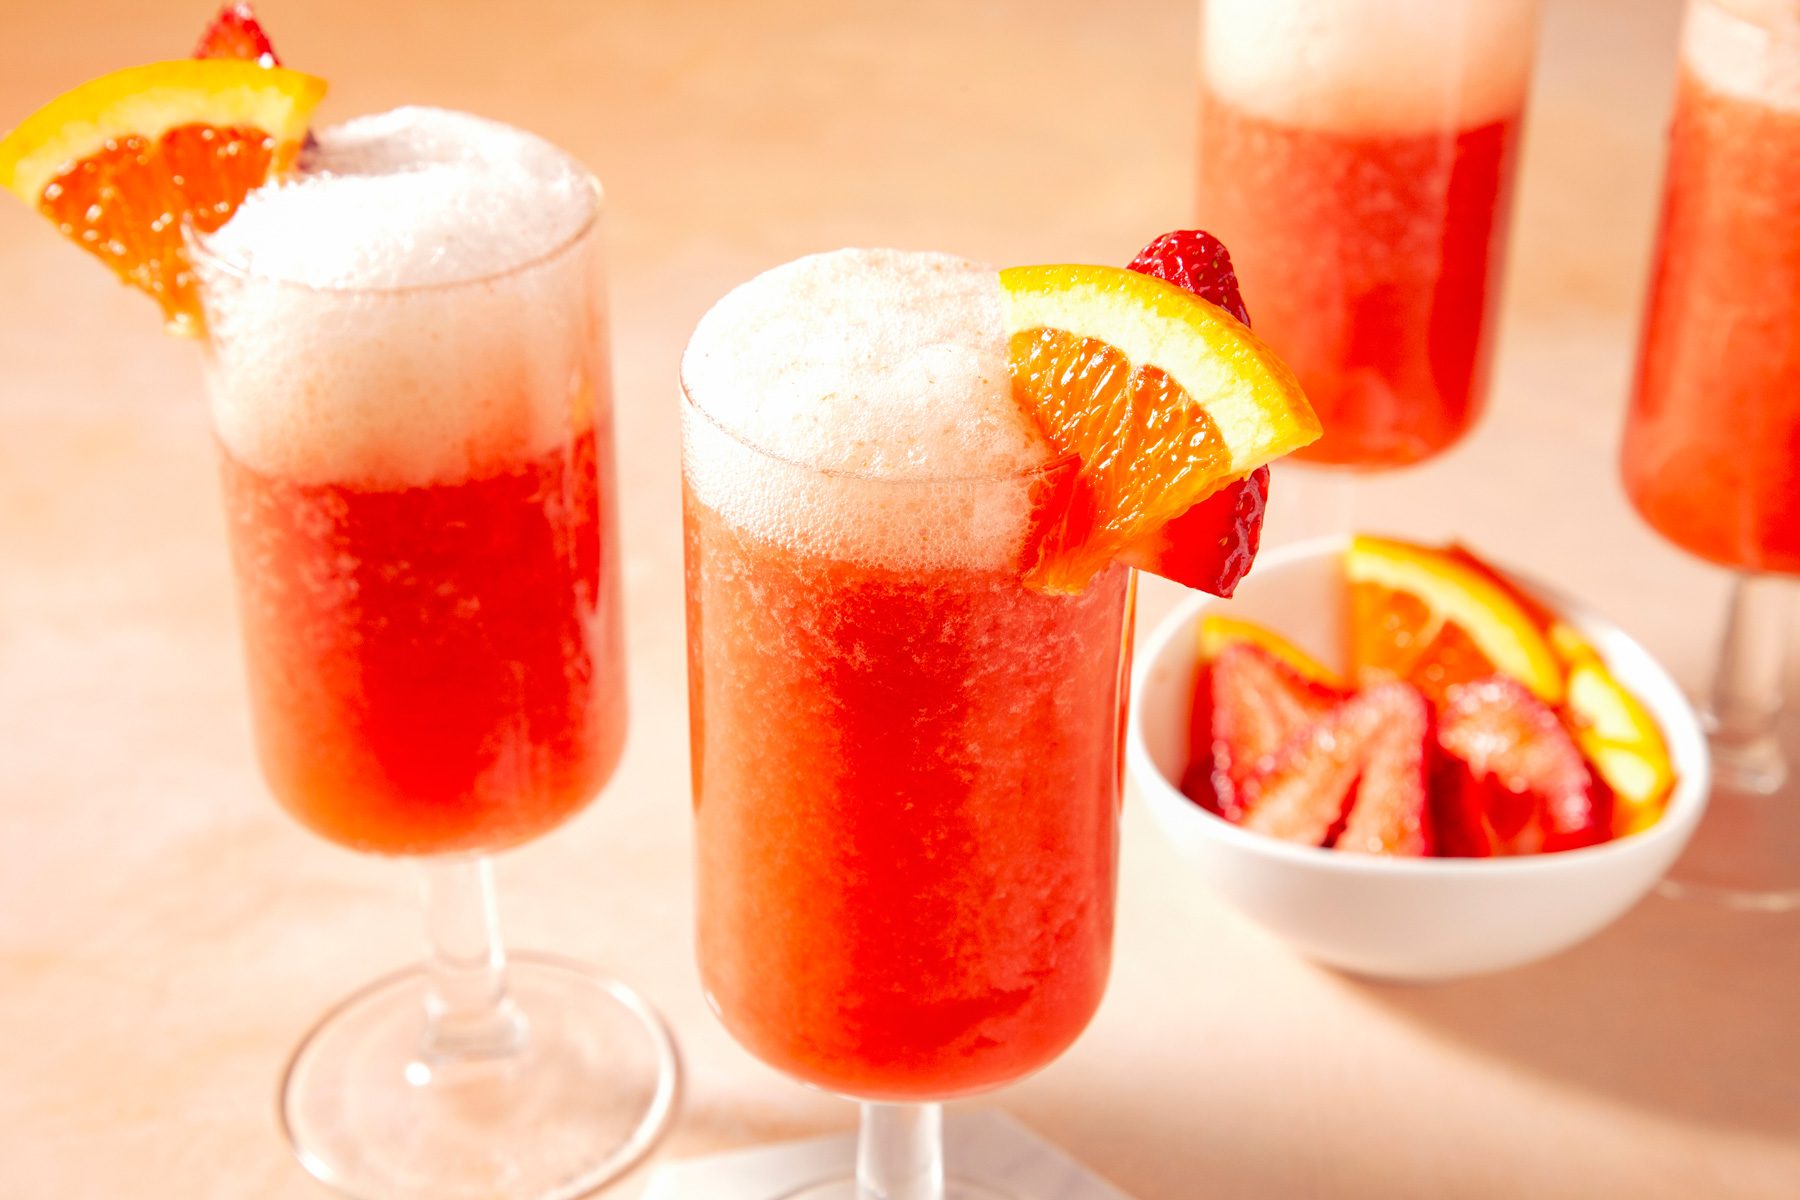 Two glass of strawberry mimosas garnished with strawberry and orange slice